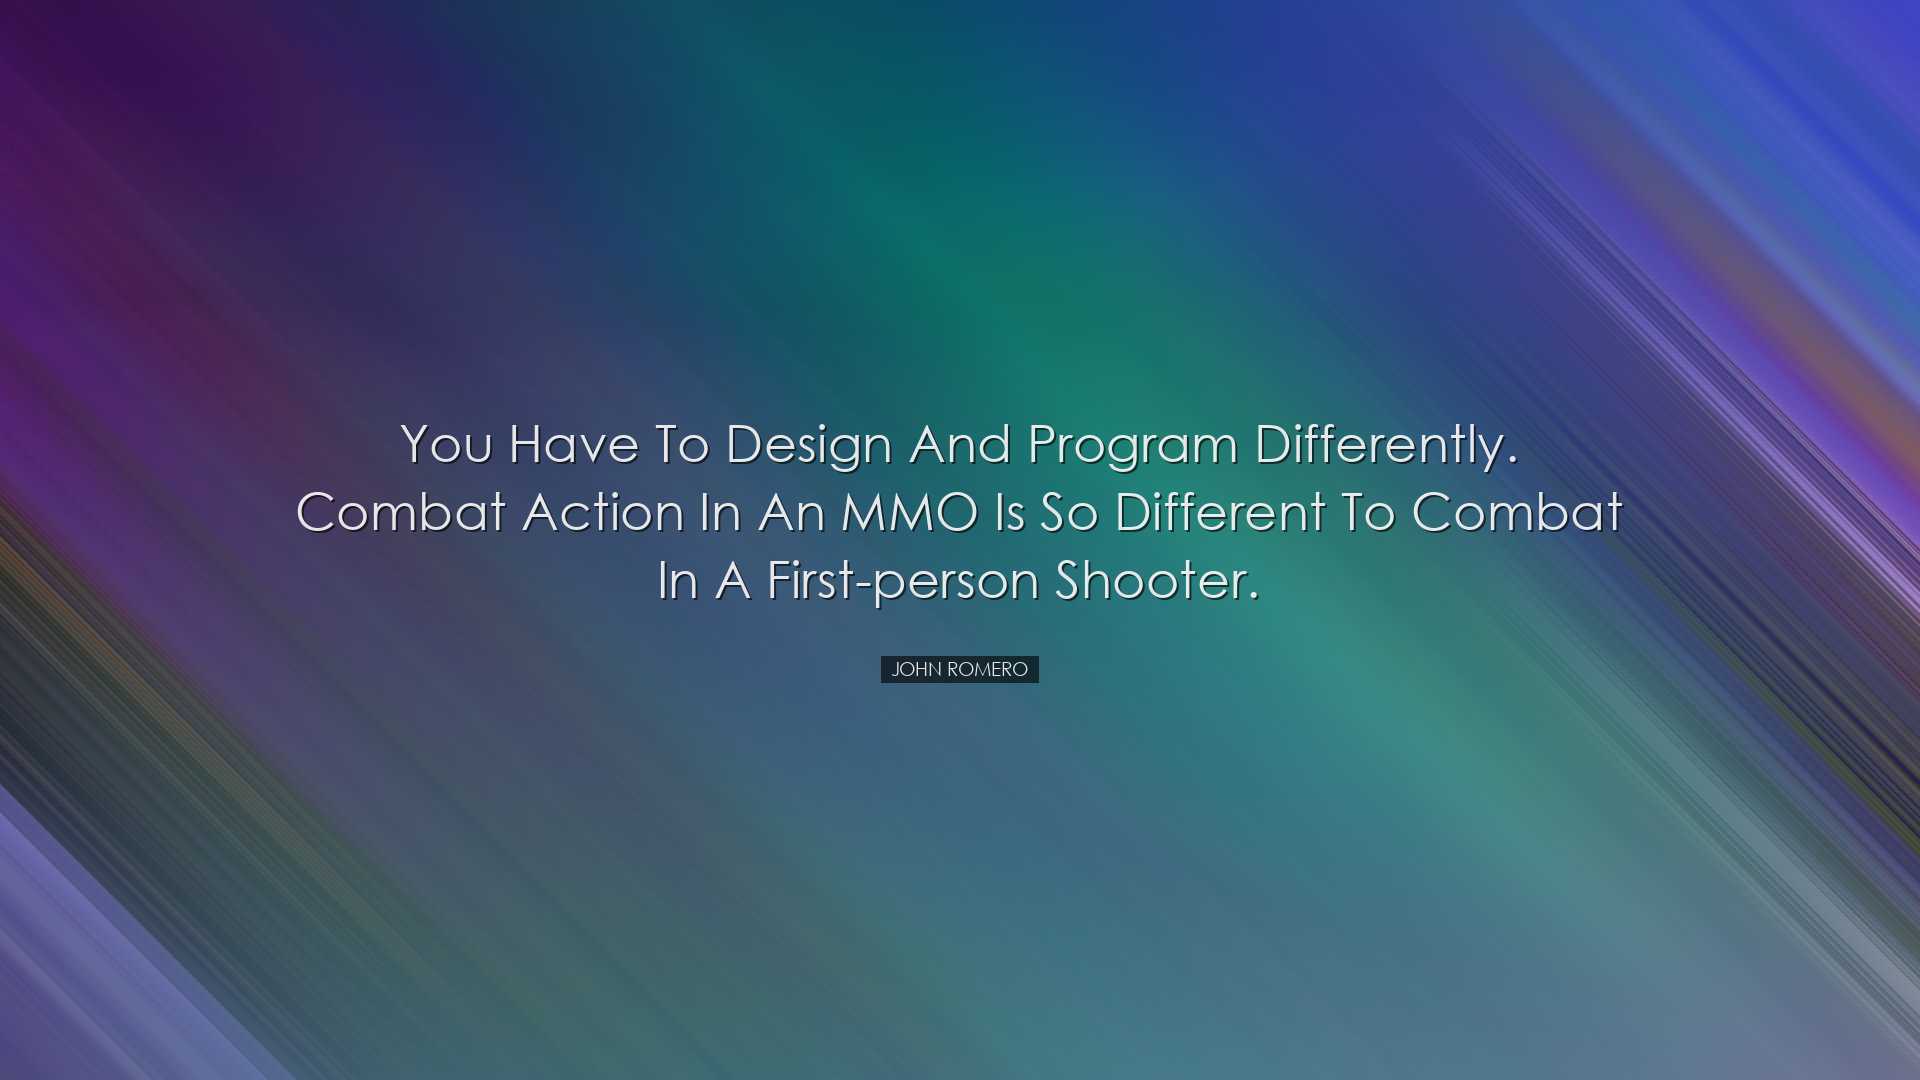 You have to design and program differently. Combat action in an MM